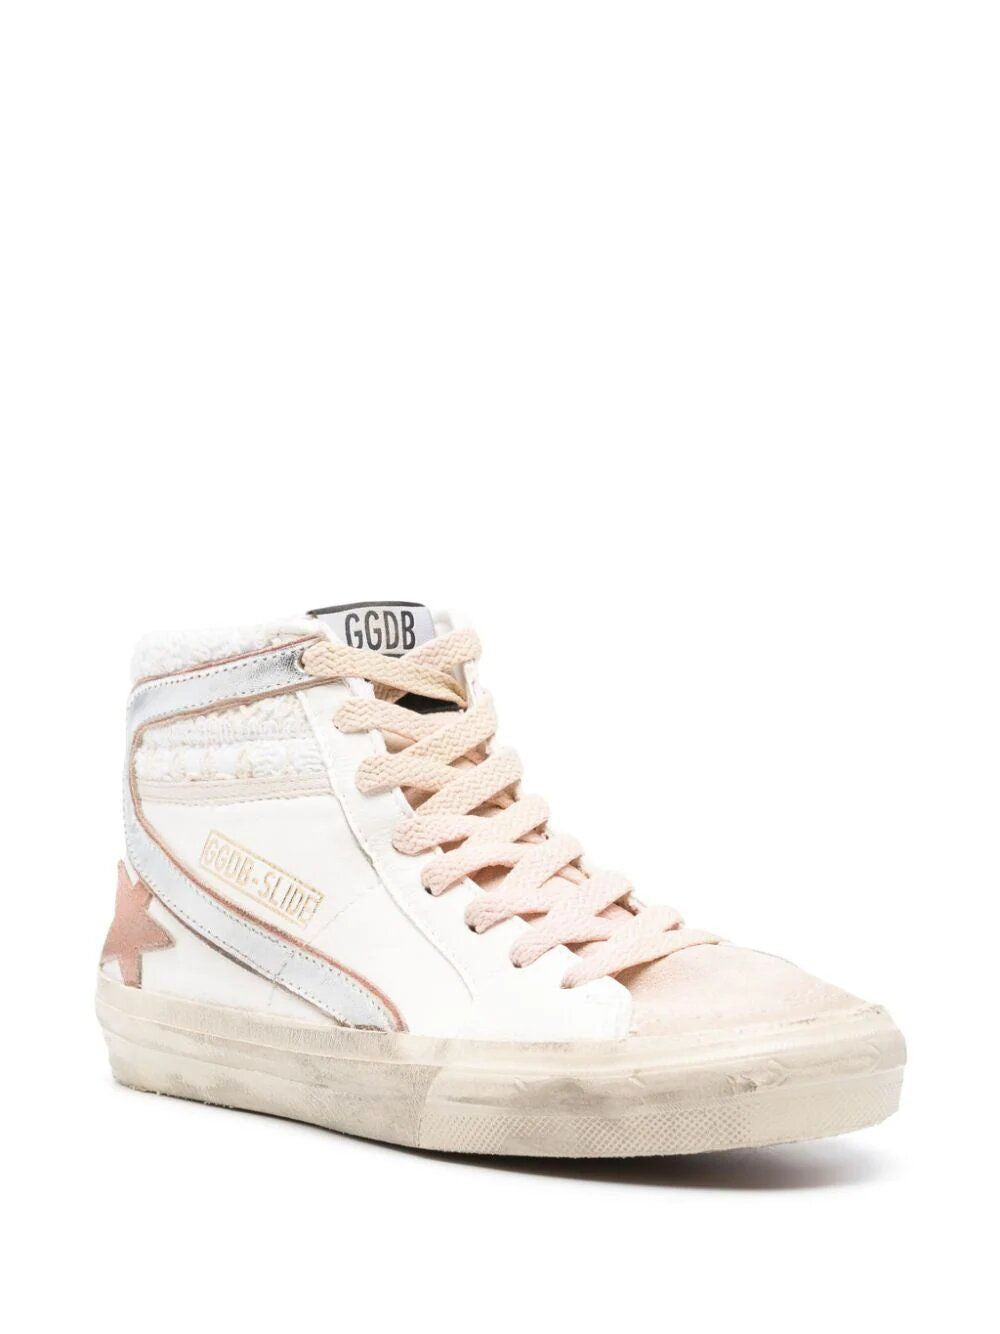 GOLDEN GOOSE White Distressed Sneakers with Metallic Trim and Embroidered Collar